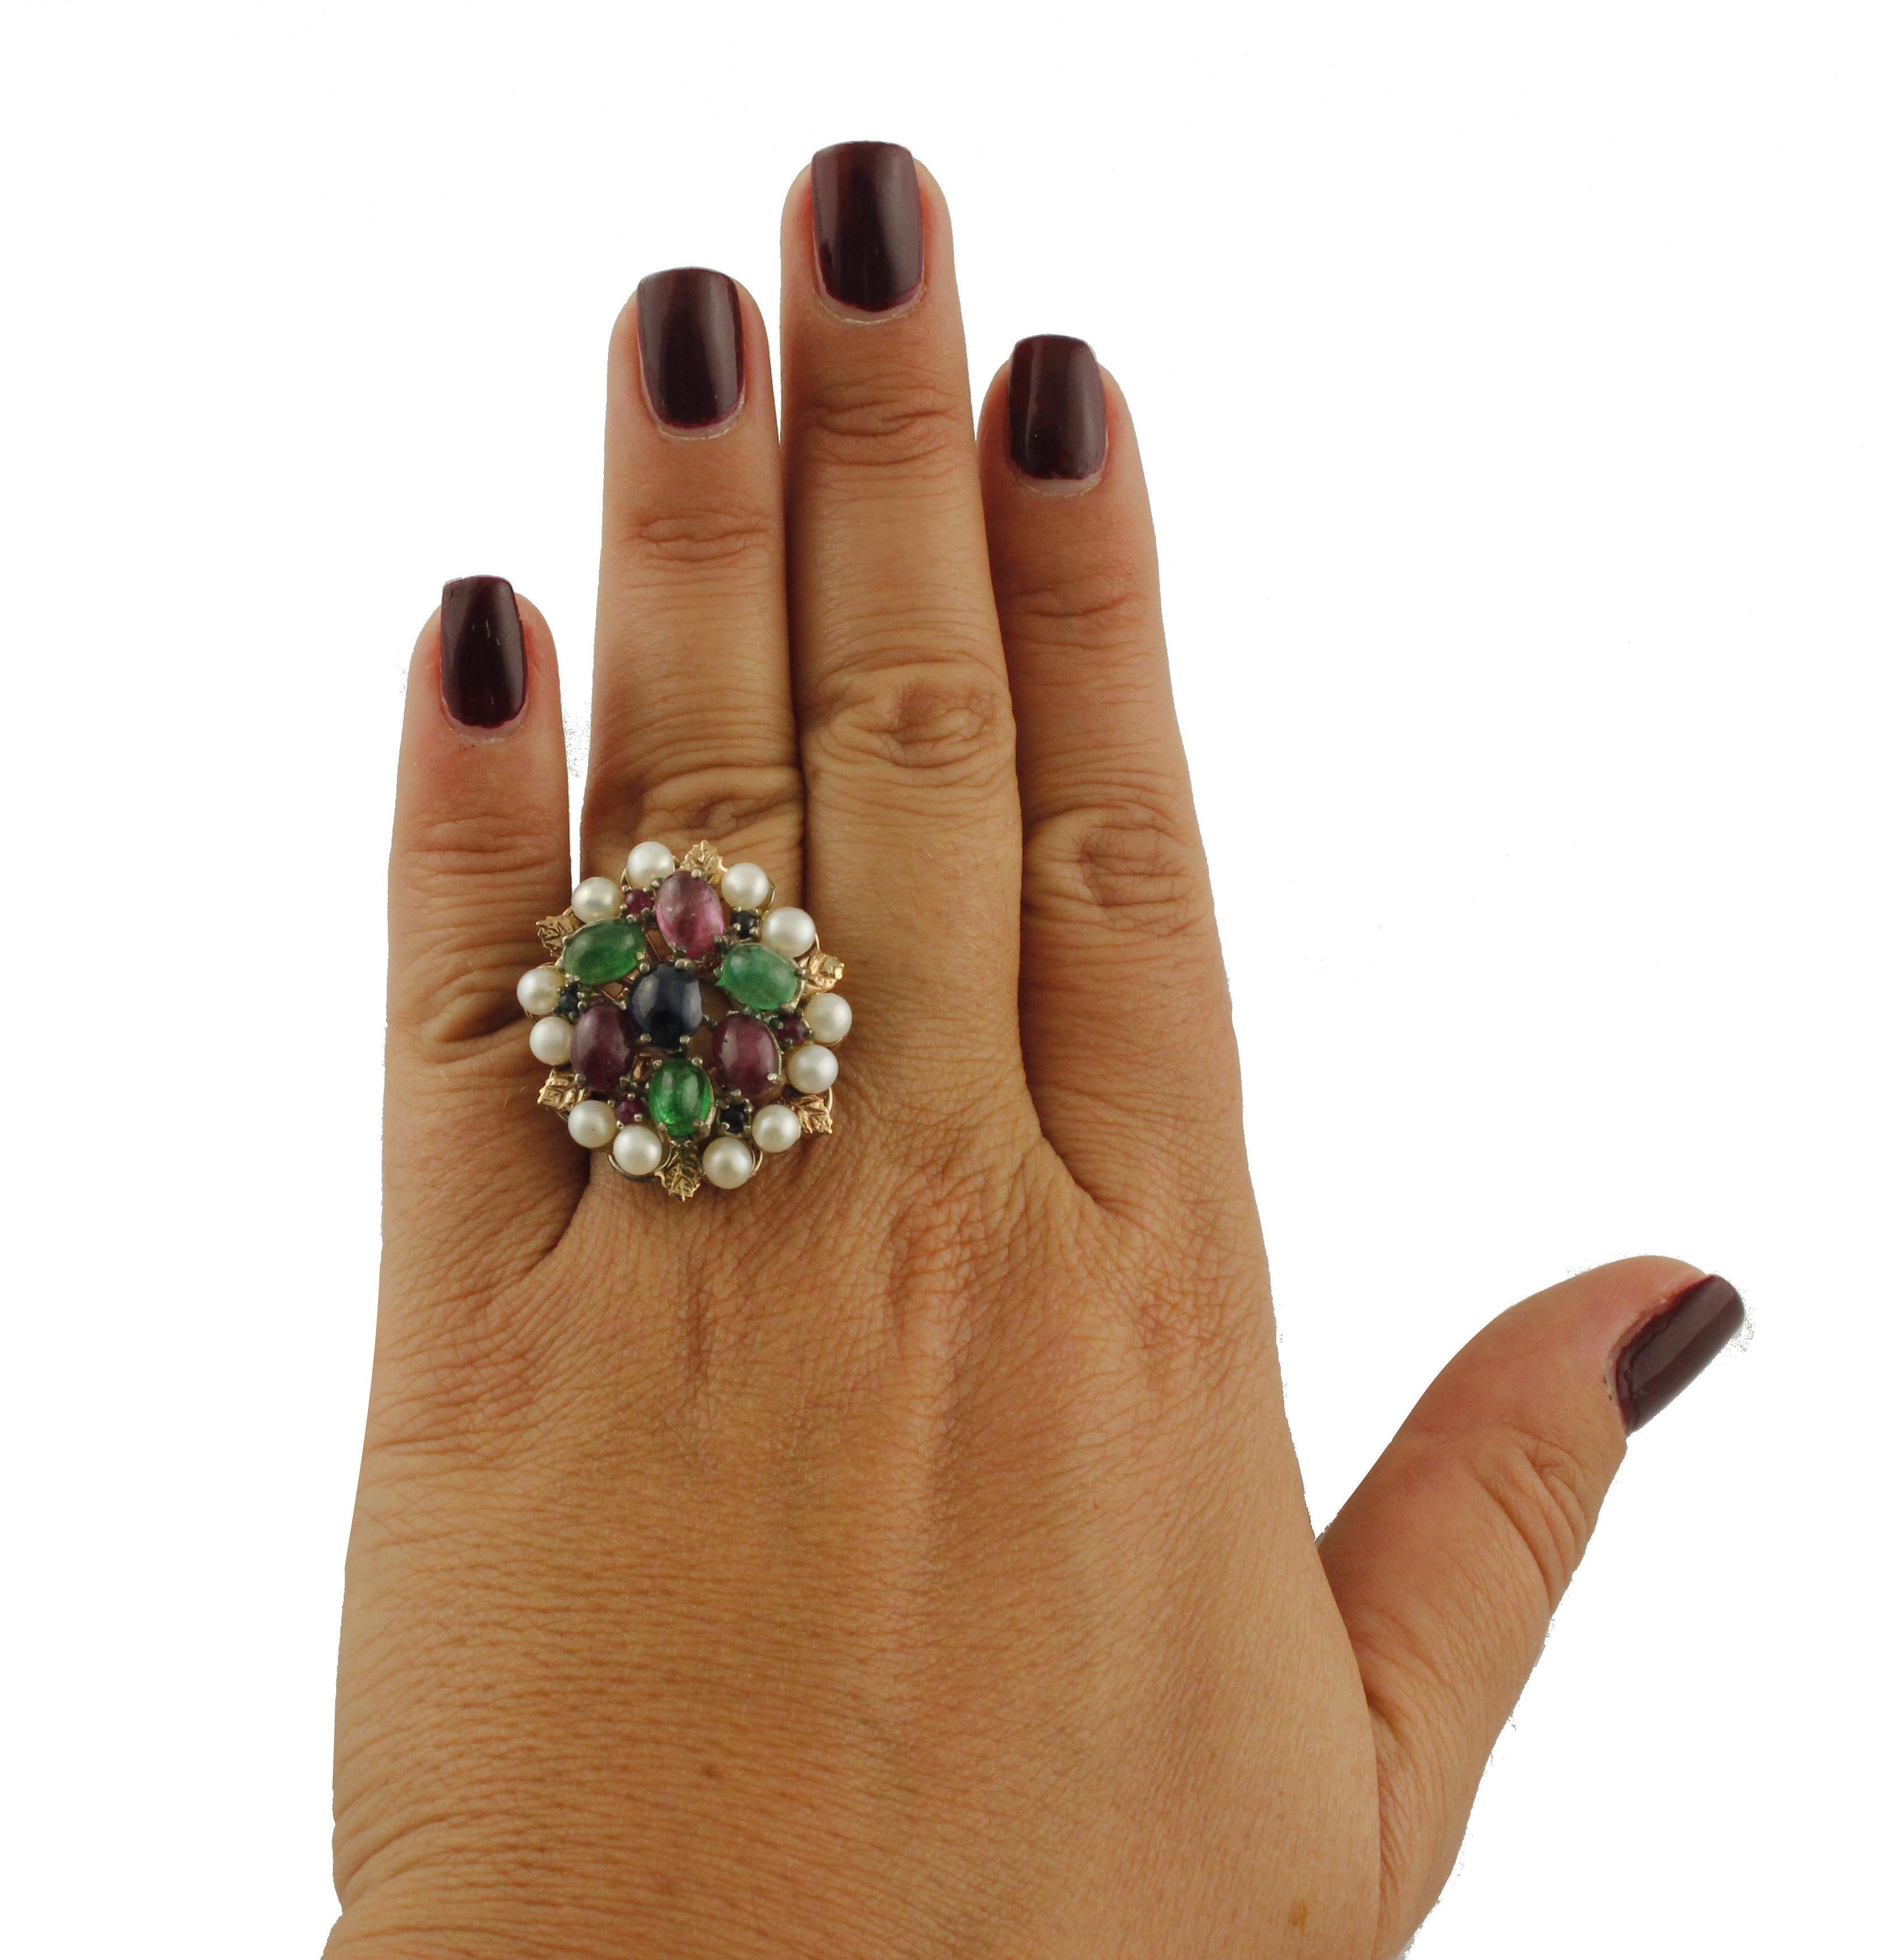 Retro Blue Sapphires Rubies Emeralds Little Pearls Rose Gold and Silver Fashion Ring